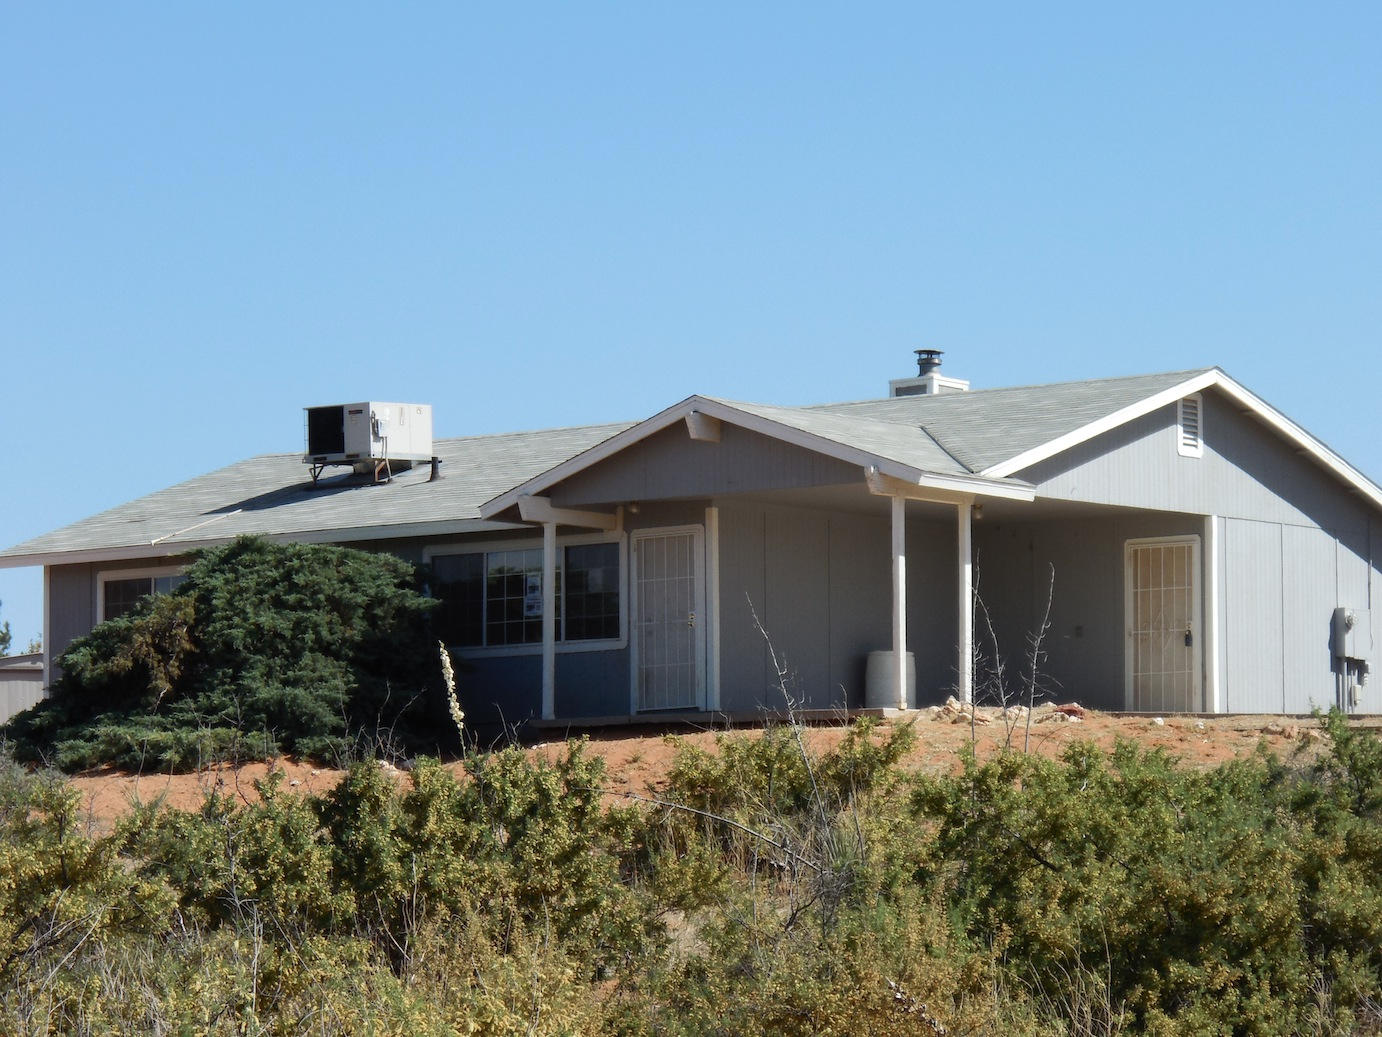  585 S Forest View Rd, Cornville, Arizona  photo